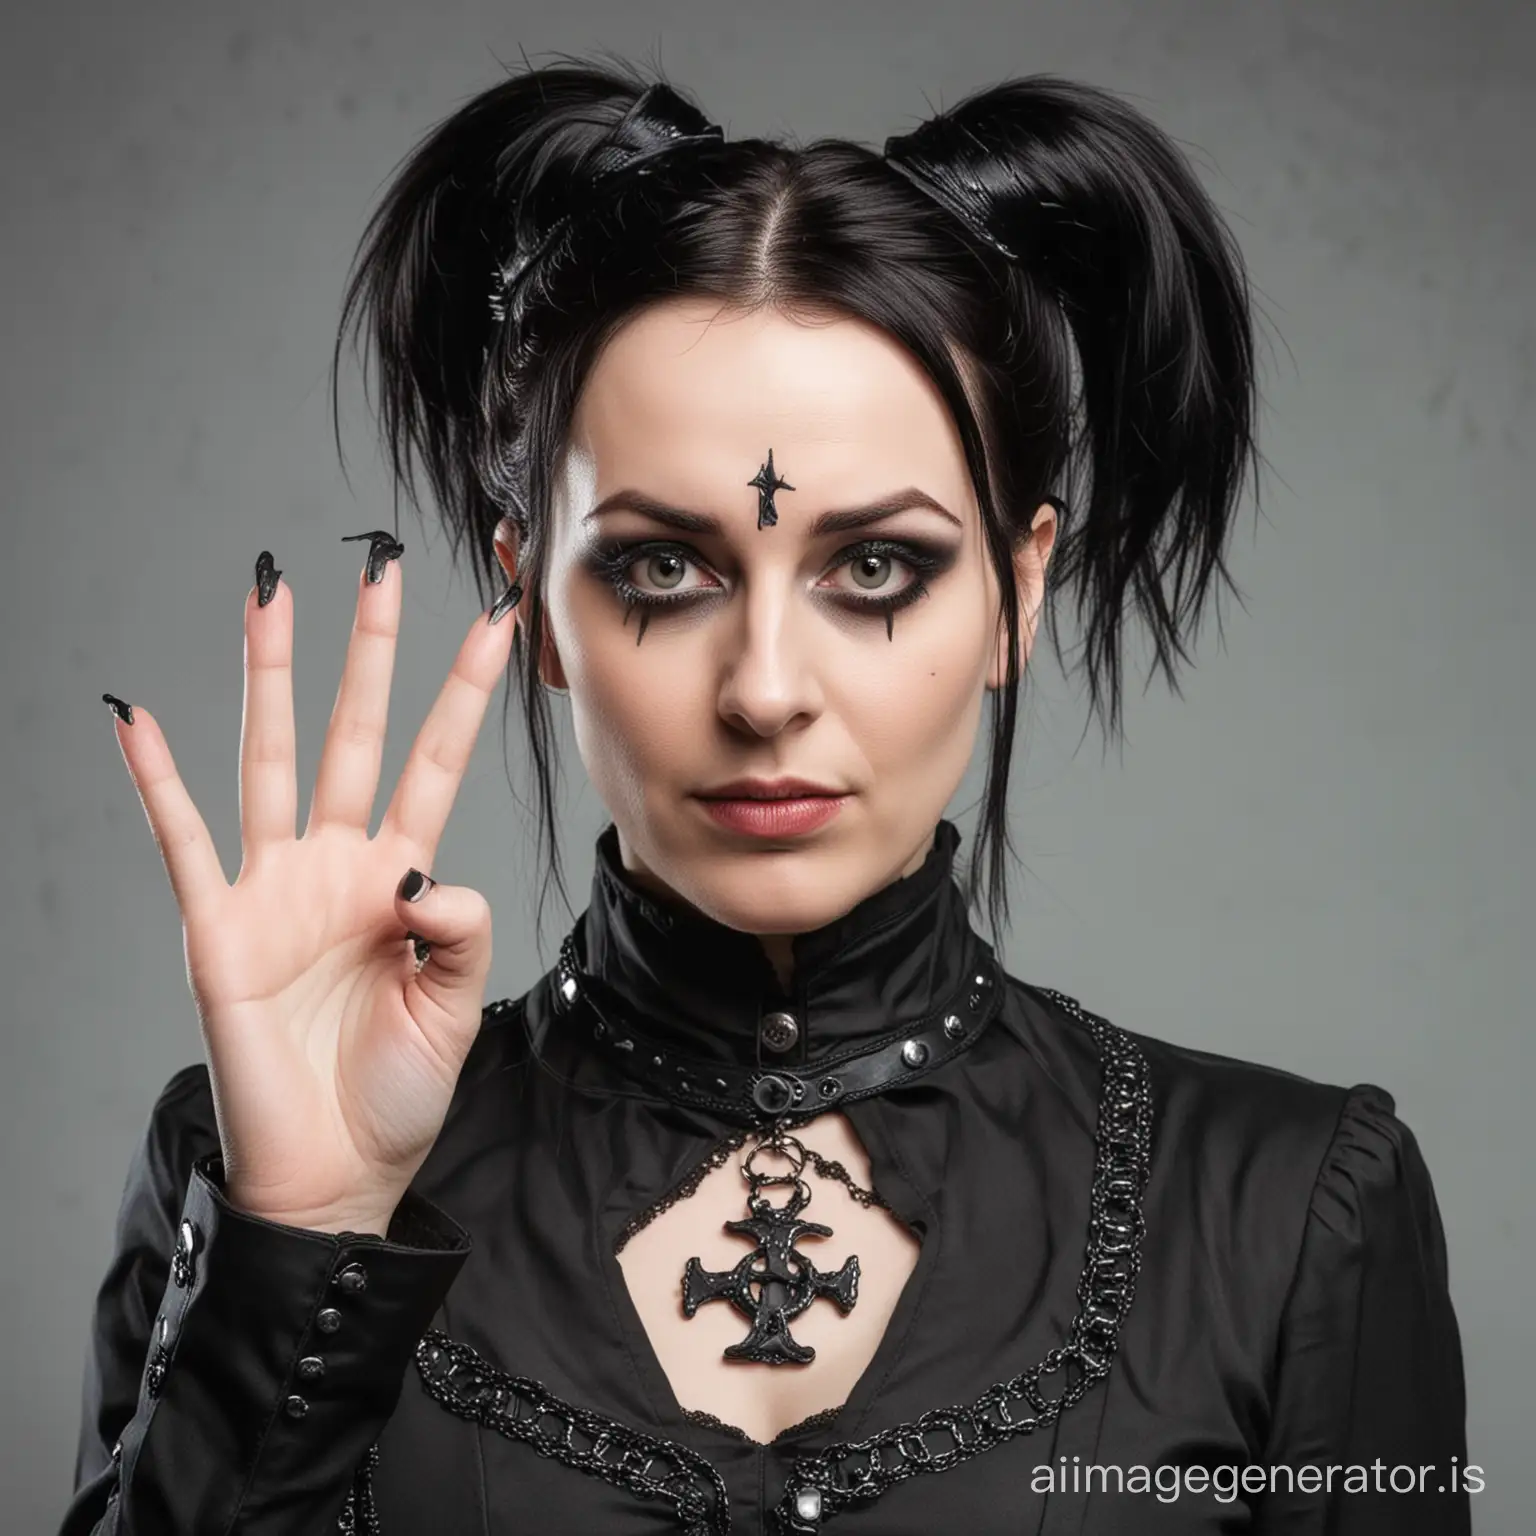 Goth german woman, mistress like, showing loser sign over her forehead